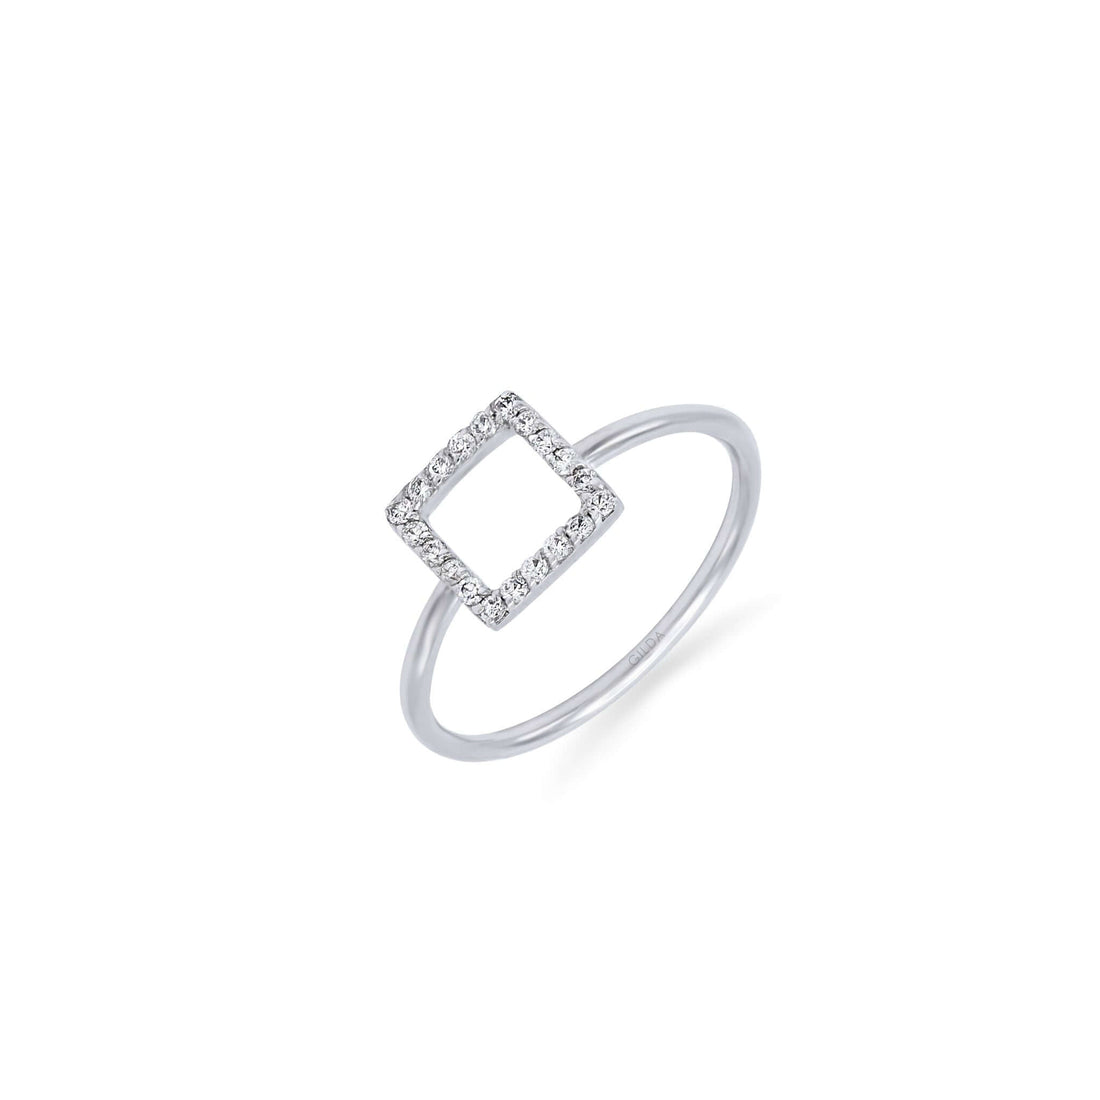 Jewelry Minnies | Diamond Ring | 0.12 Cts. | 18K Gold - ring Zengoda Shop online from Artisan Brands